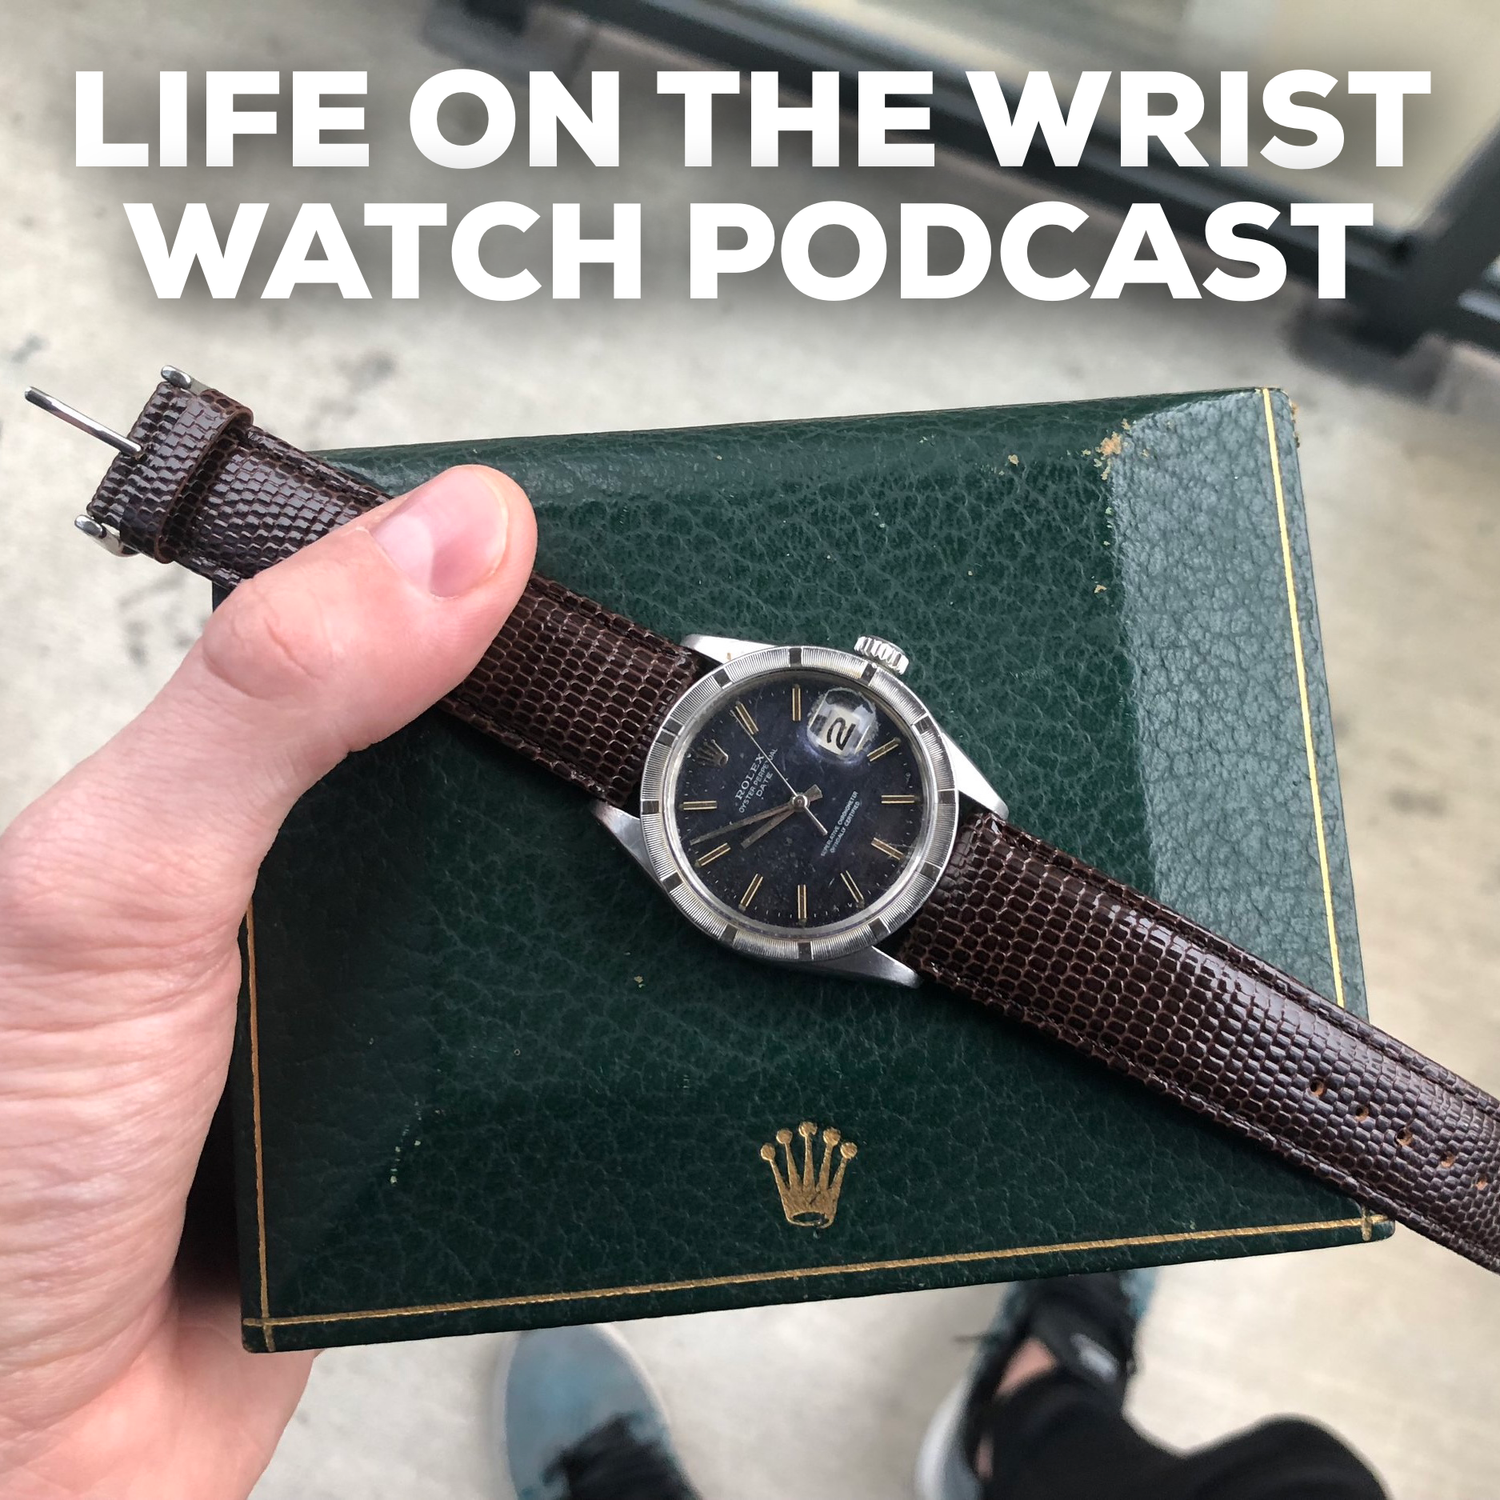 Ep. 160 - The Bulgari Bulgari, LVMH Watch Week and Green Dials, A Talk About Zenith's Heritage